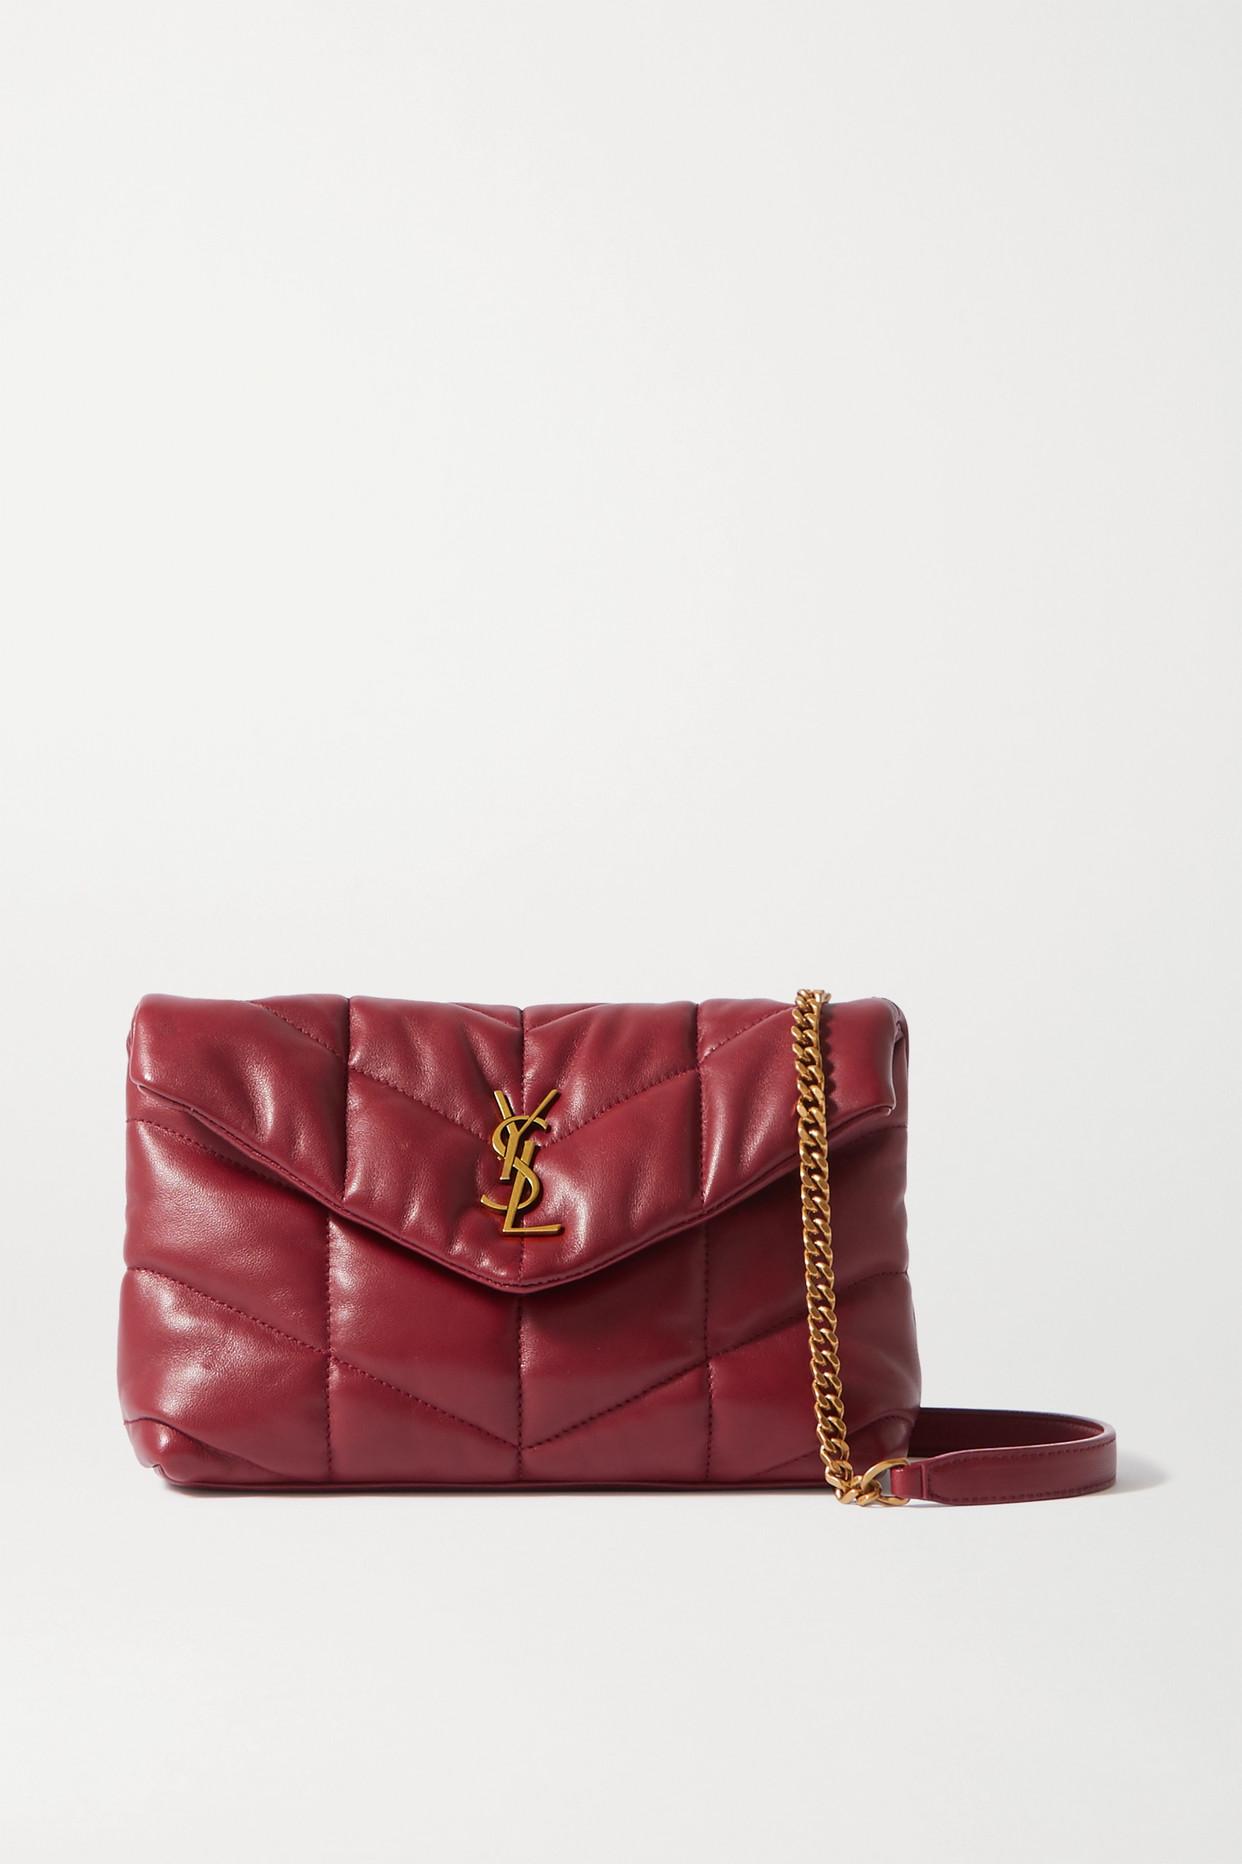 Saint Laurent Loulou Puffer Small Shoulder Bag in Red